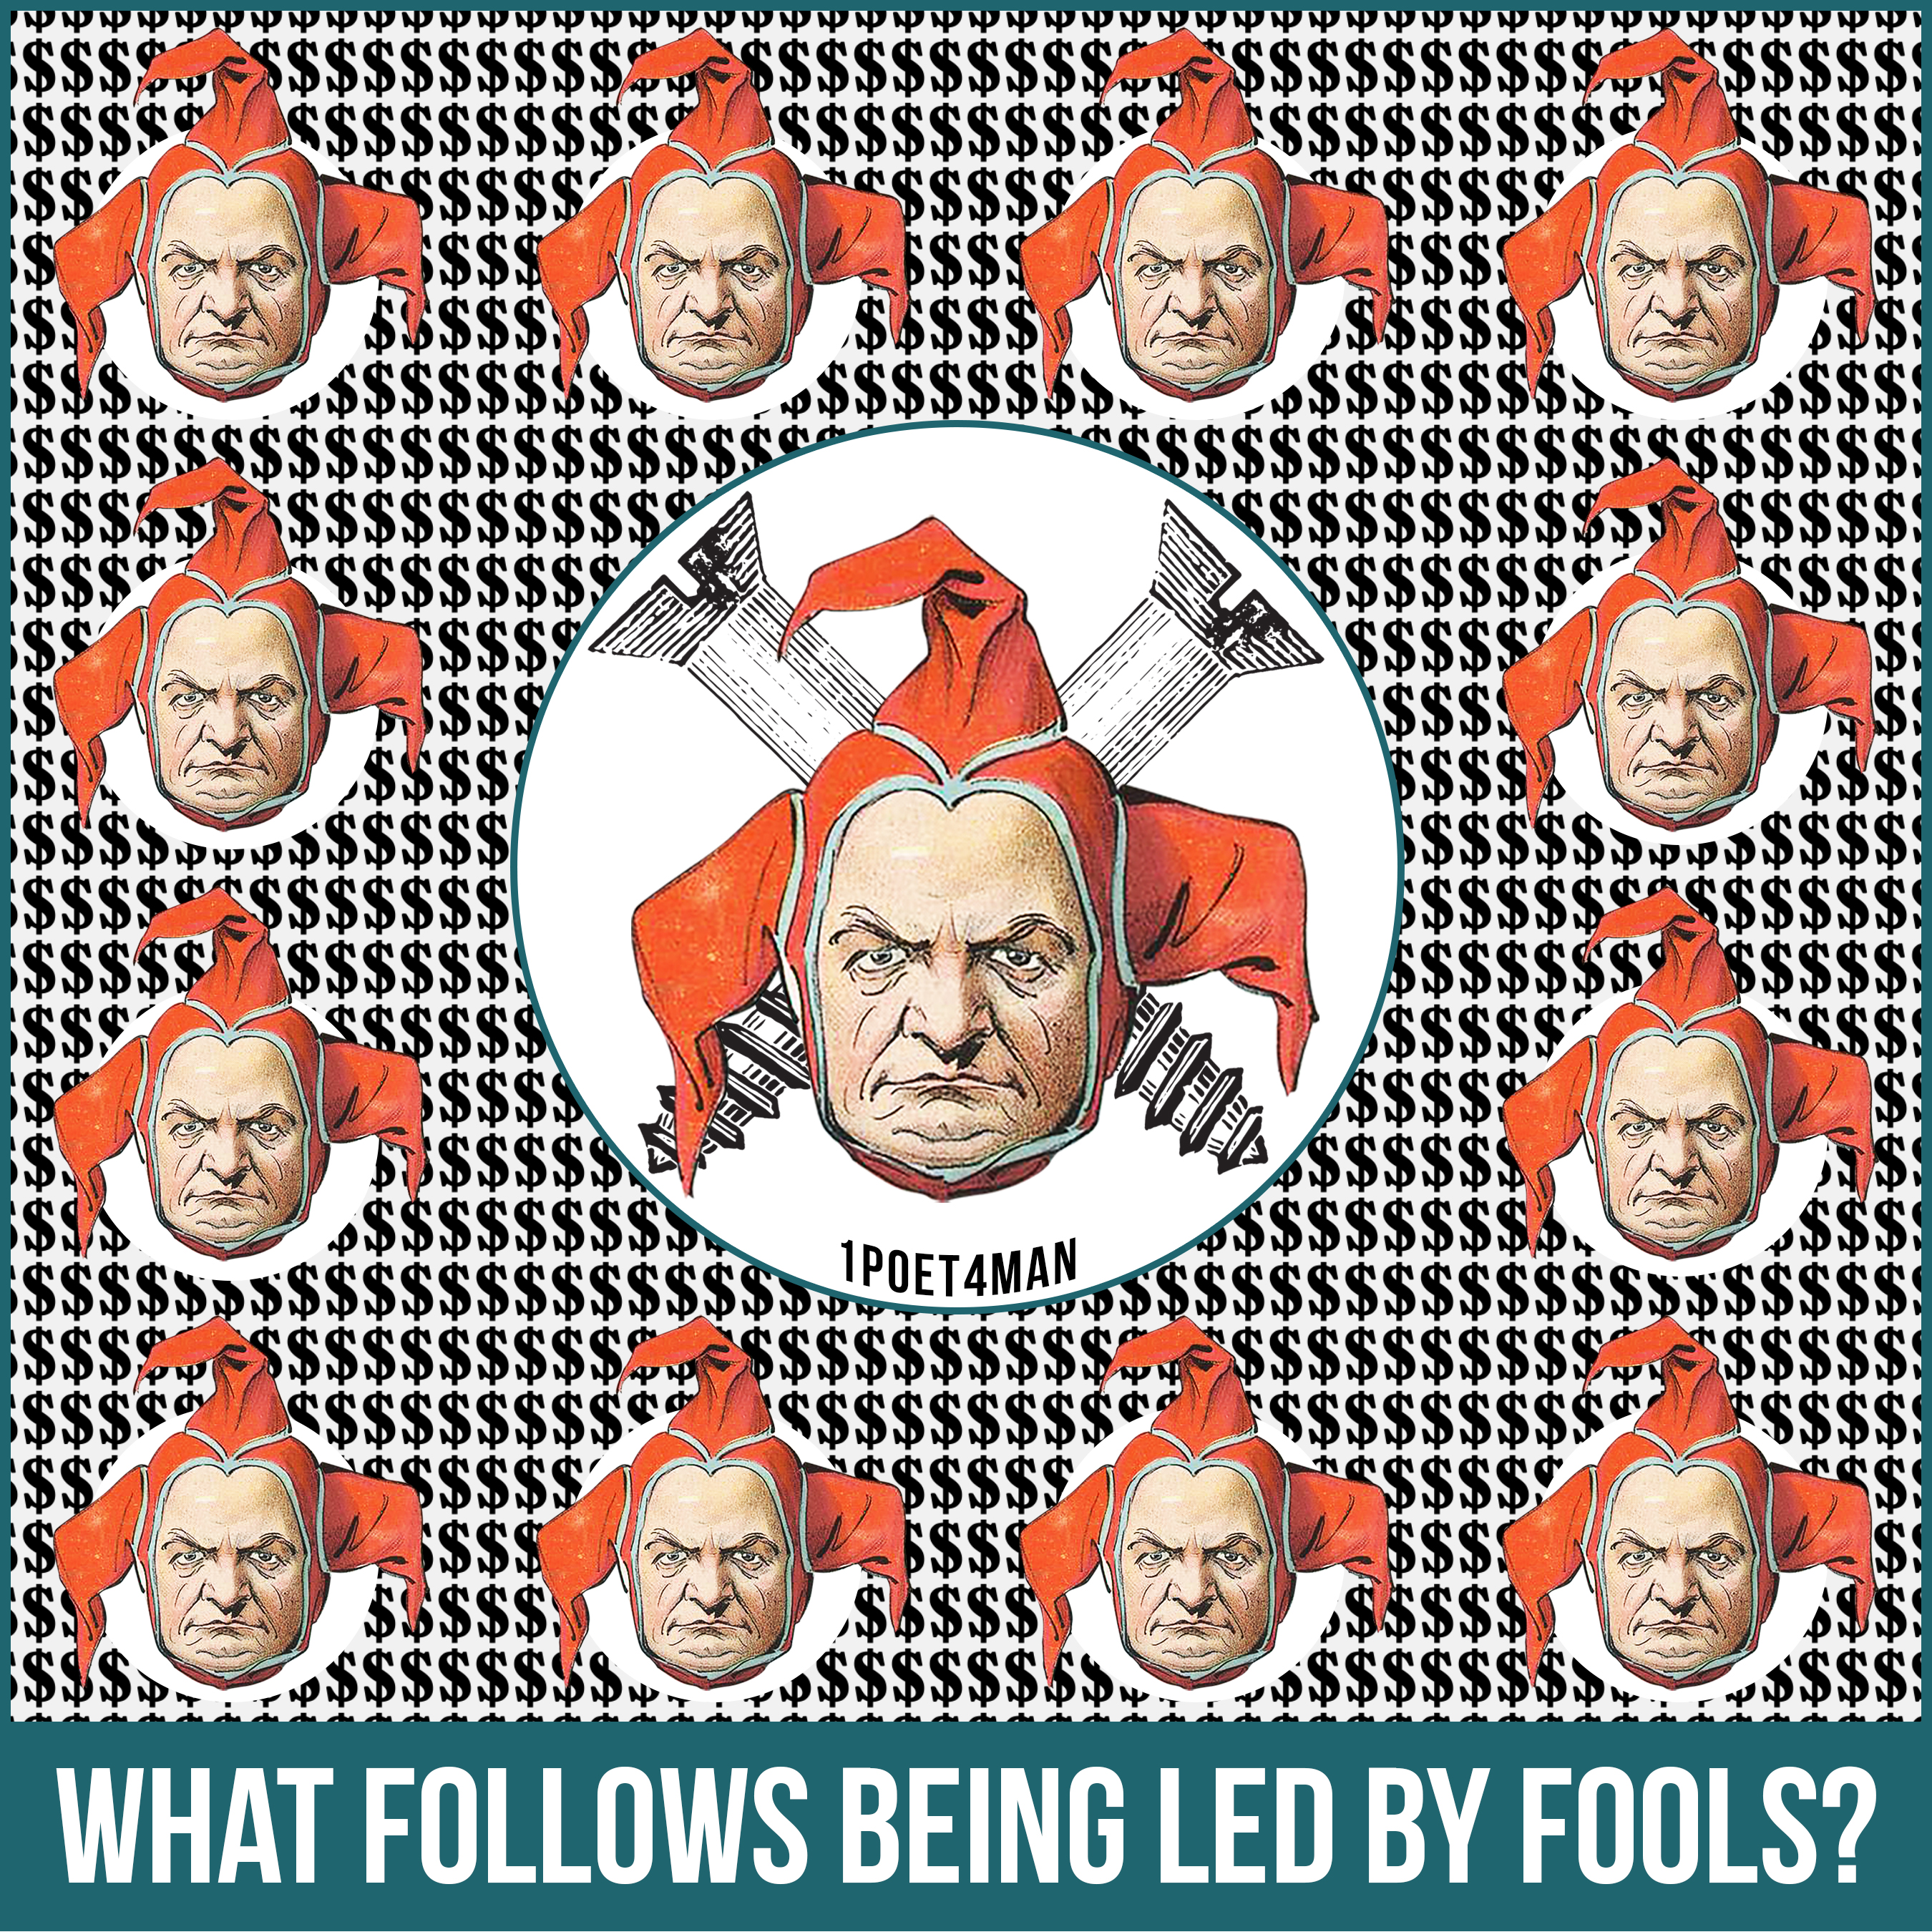 what follows being led by fools